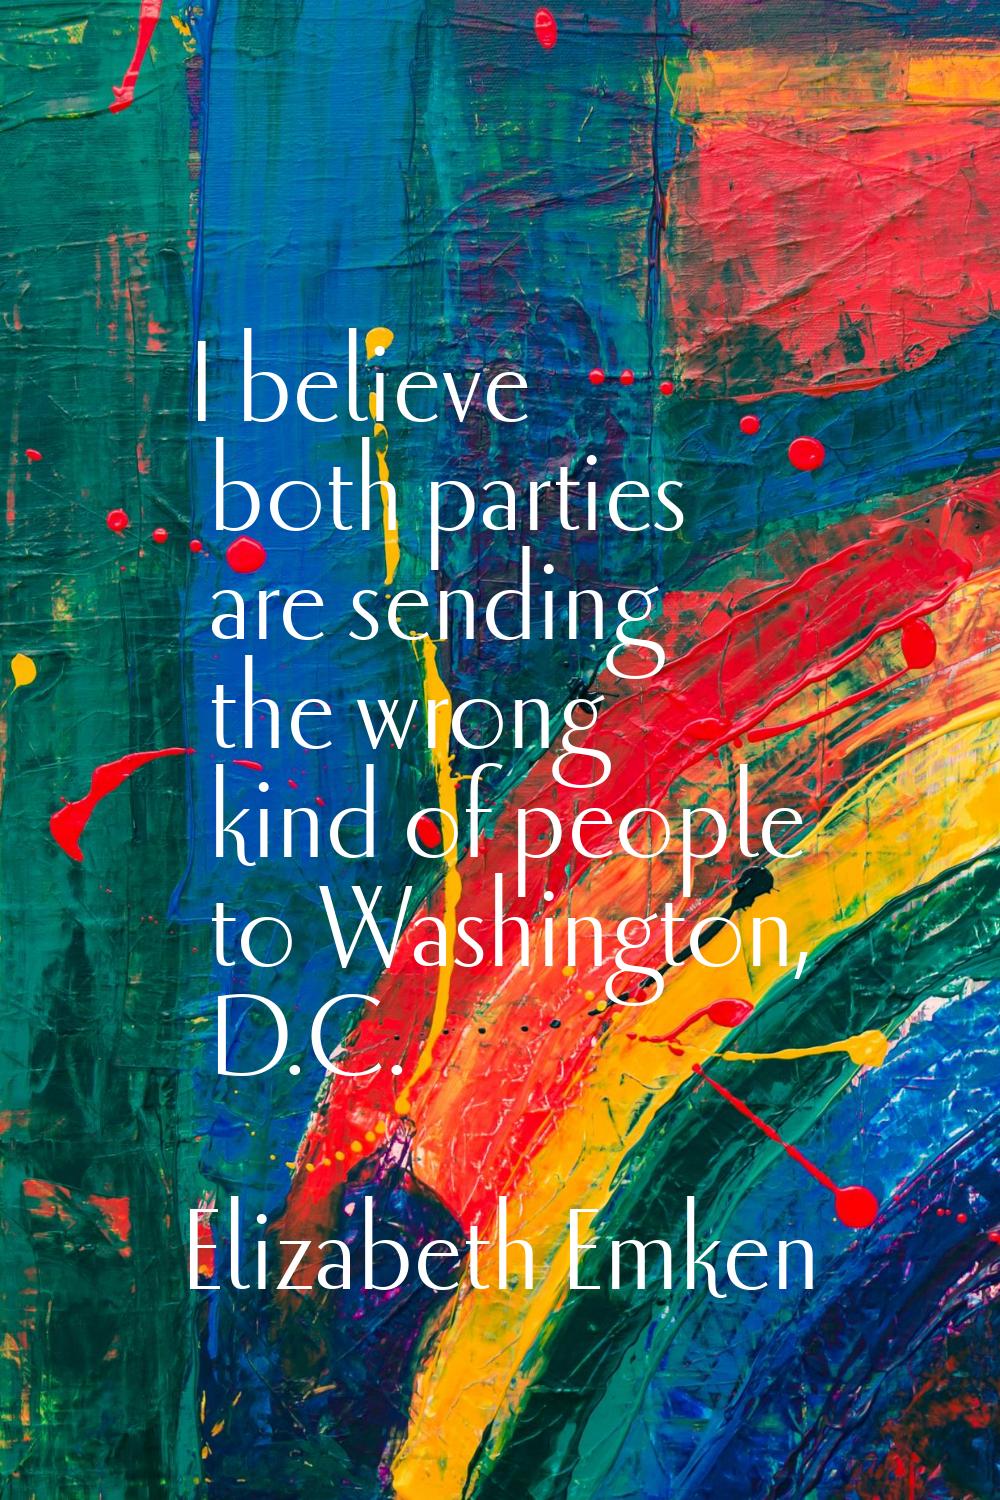 I believe both parties are sending the wrong kind of people to Washington, D.C.